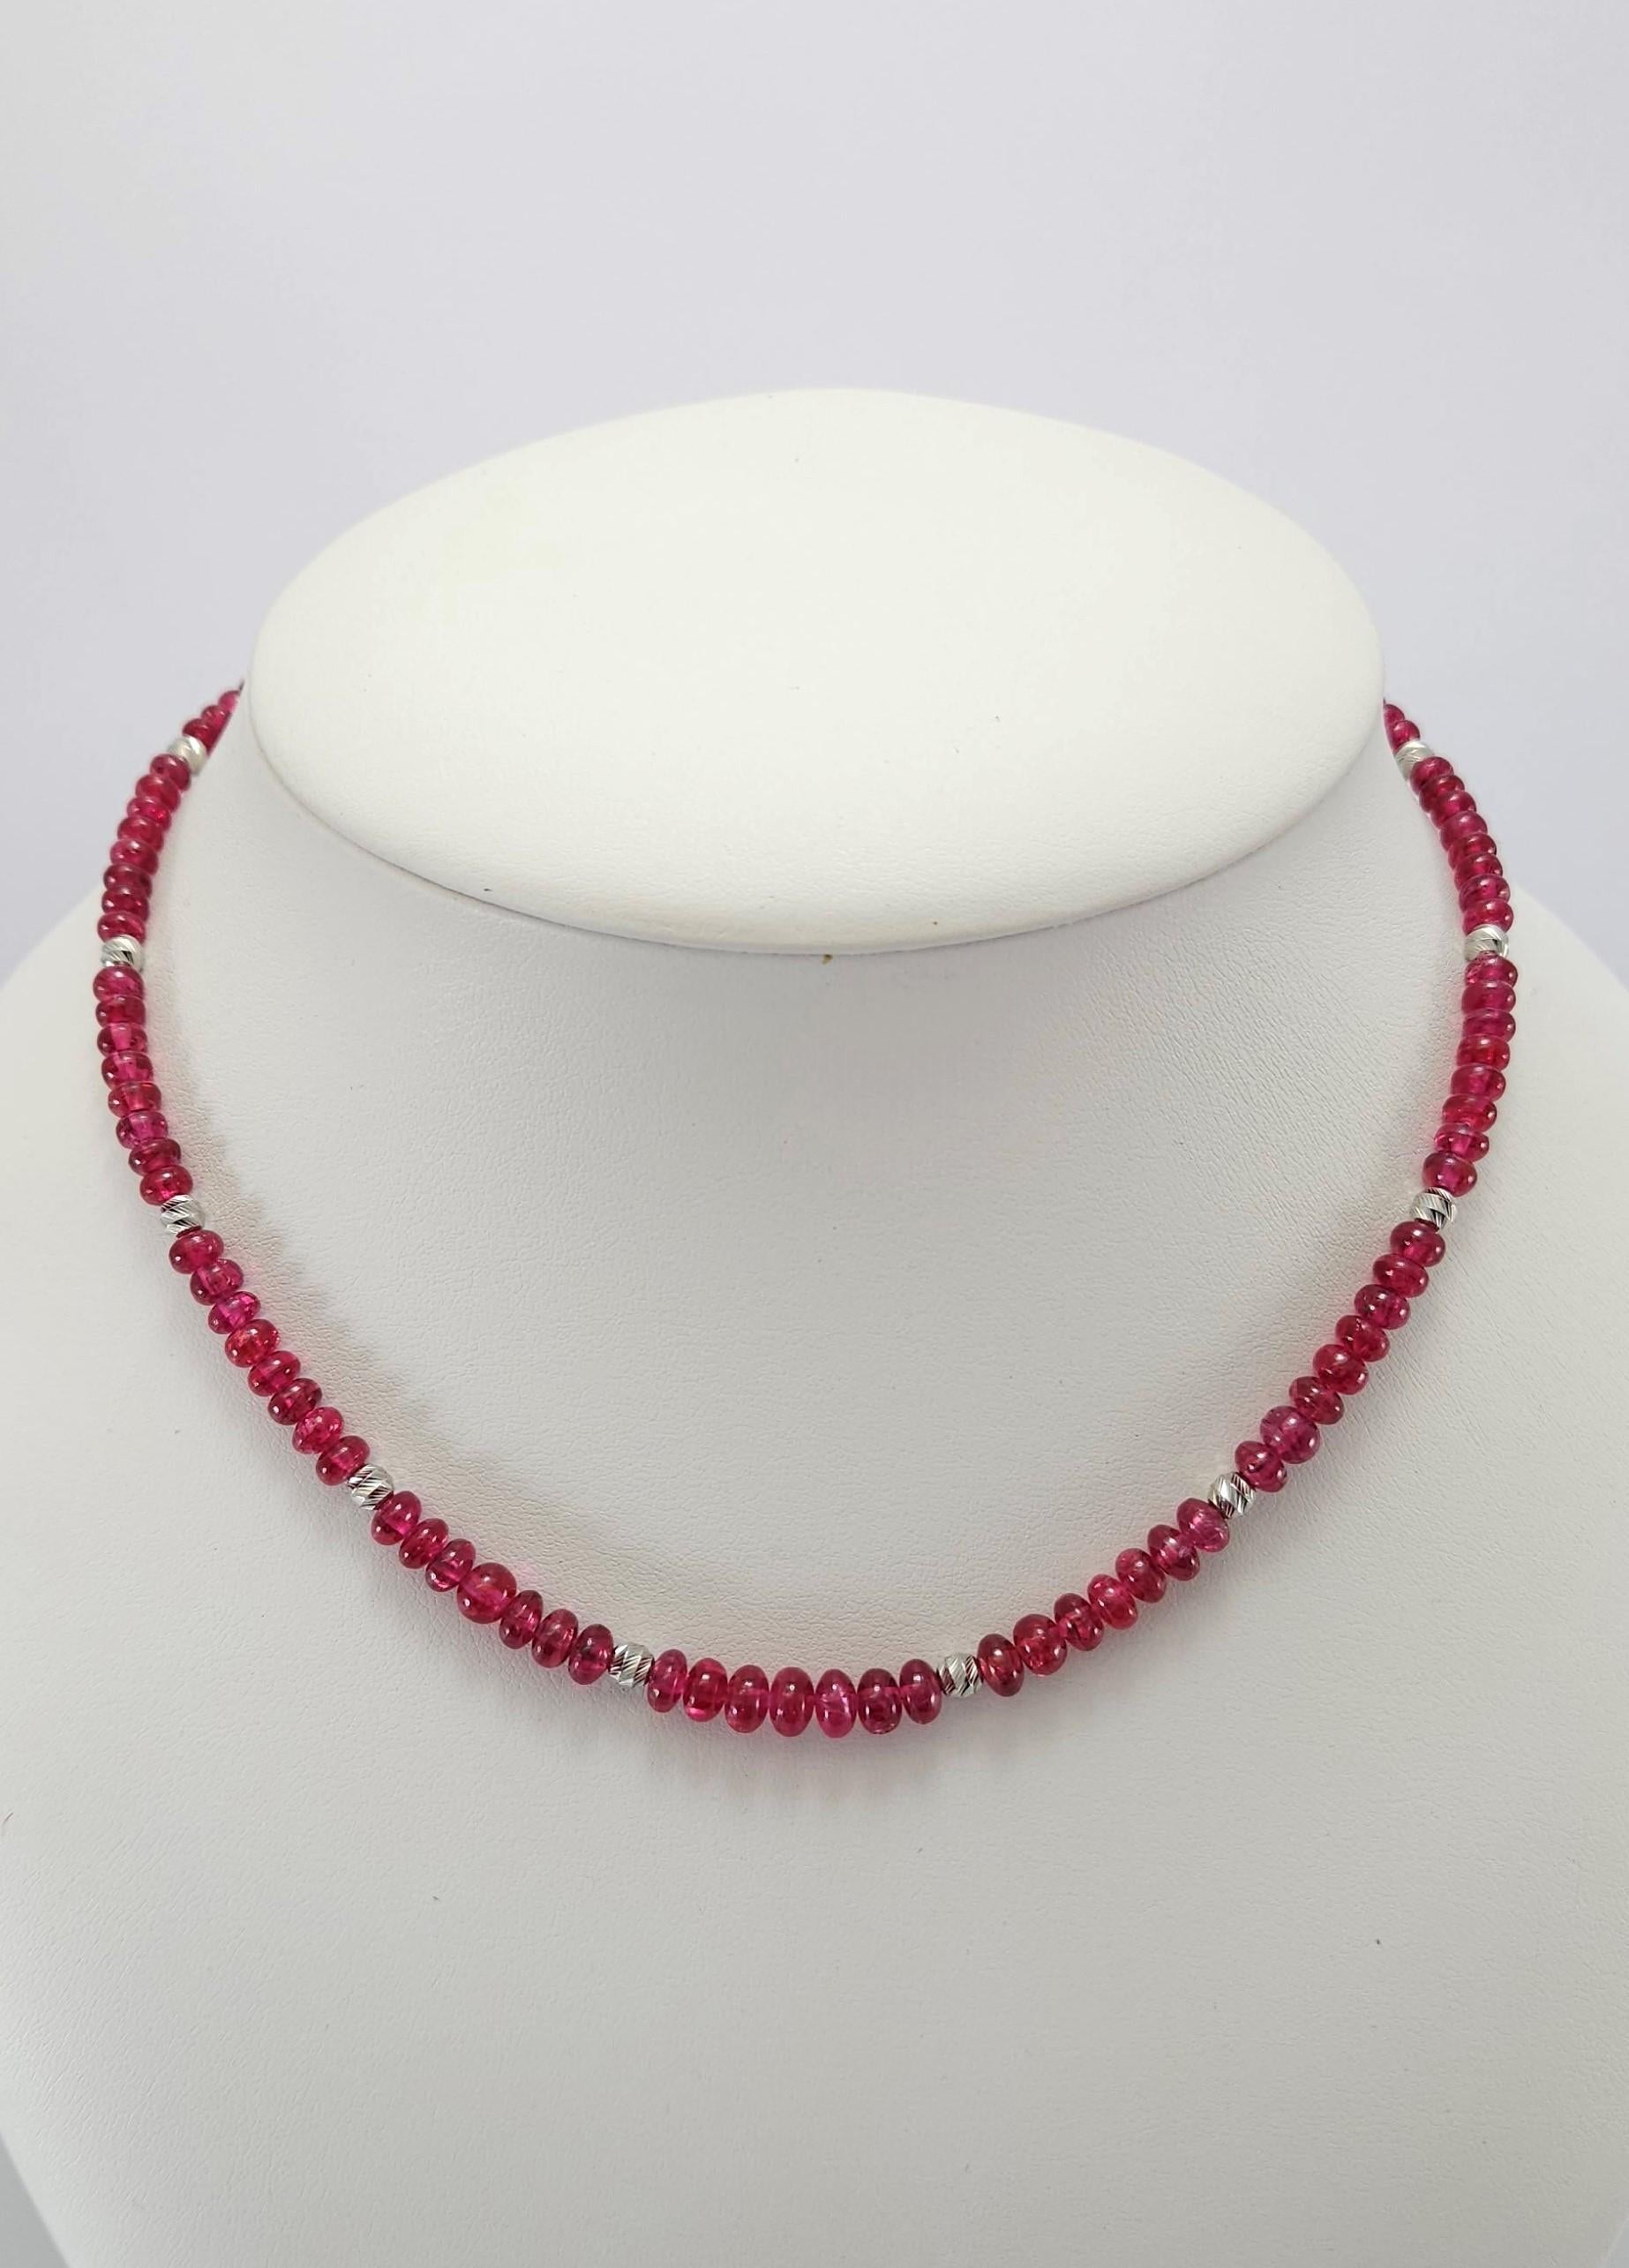 This Natural red Spinel Rondel Beaded Necklace with 18 Carat white Gold is hand cut in German quality.
The hexagonal screw clasp is easy to handle and very secure.
Finding this high quality gem material in a necklace is very rare!
Timeless and